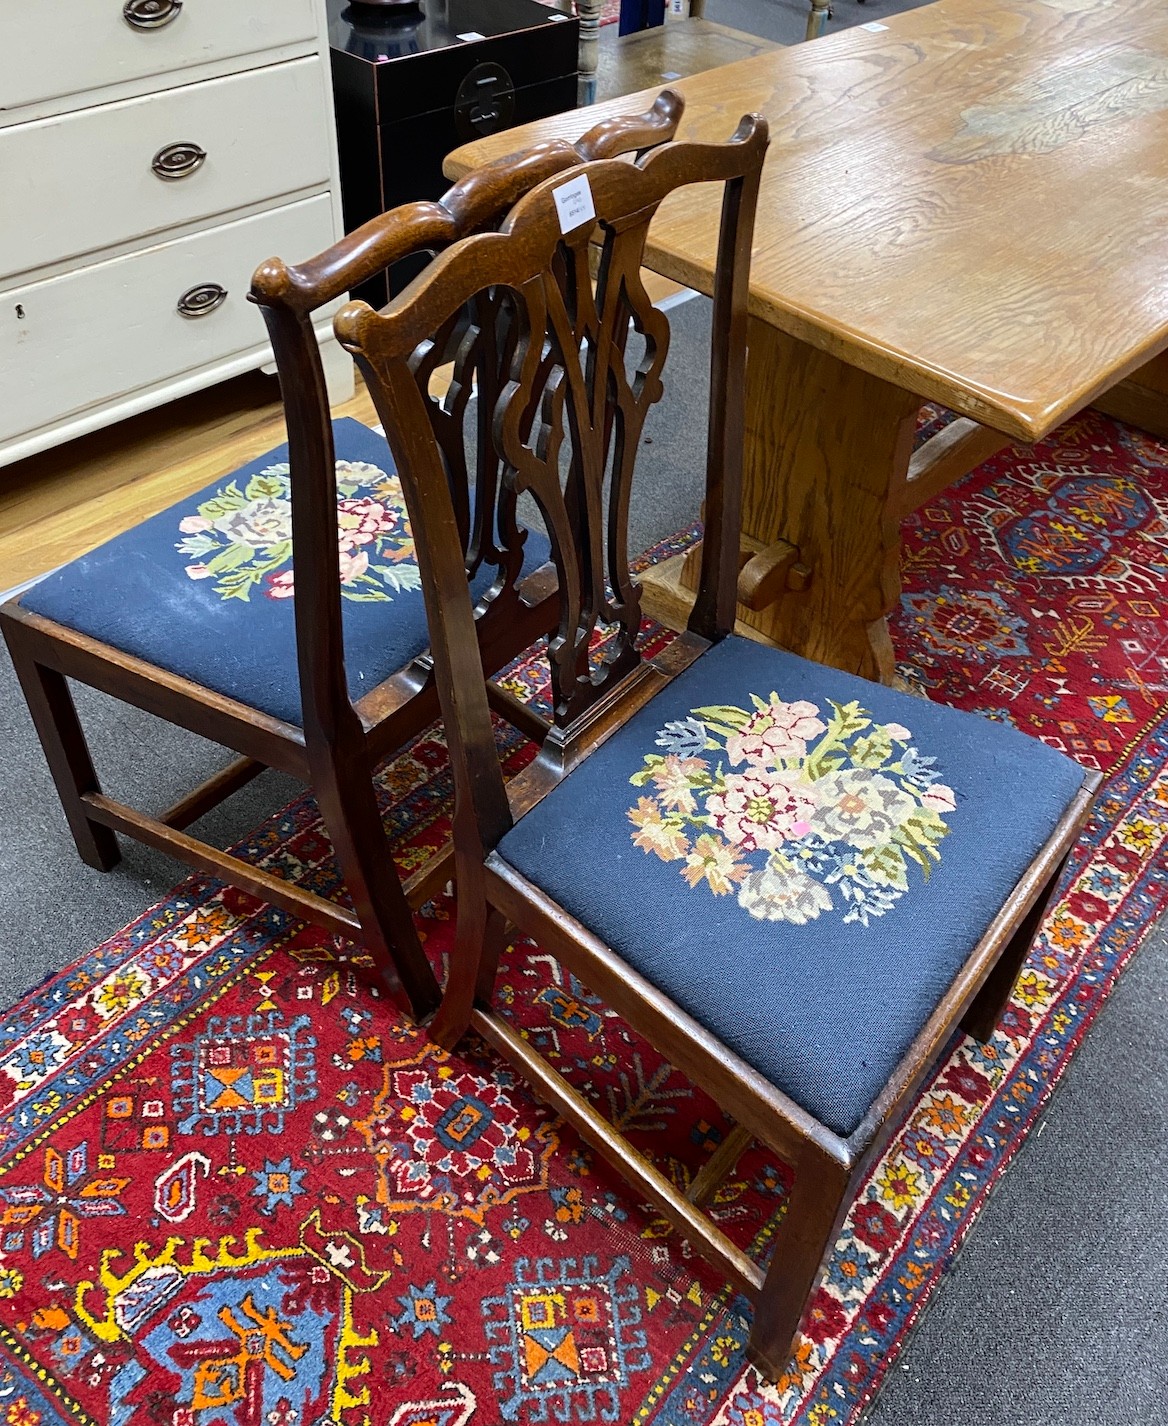 A pair of George III mahogany dining chairs with tapestry seats